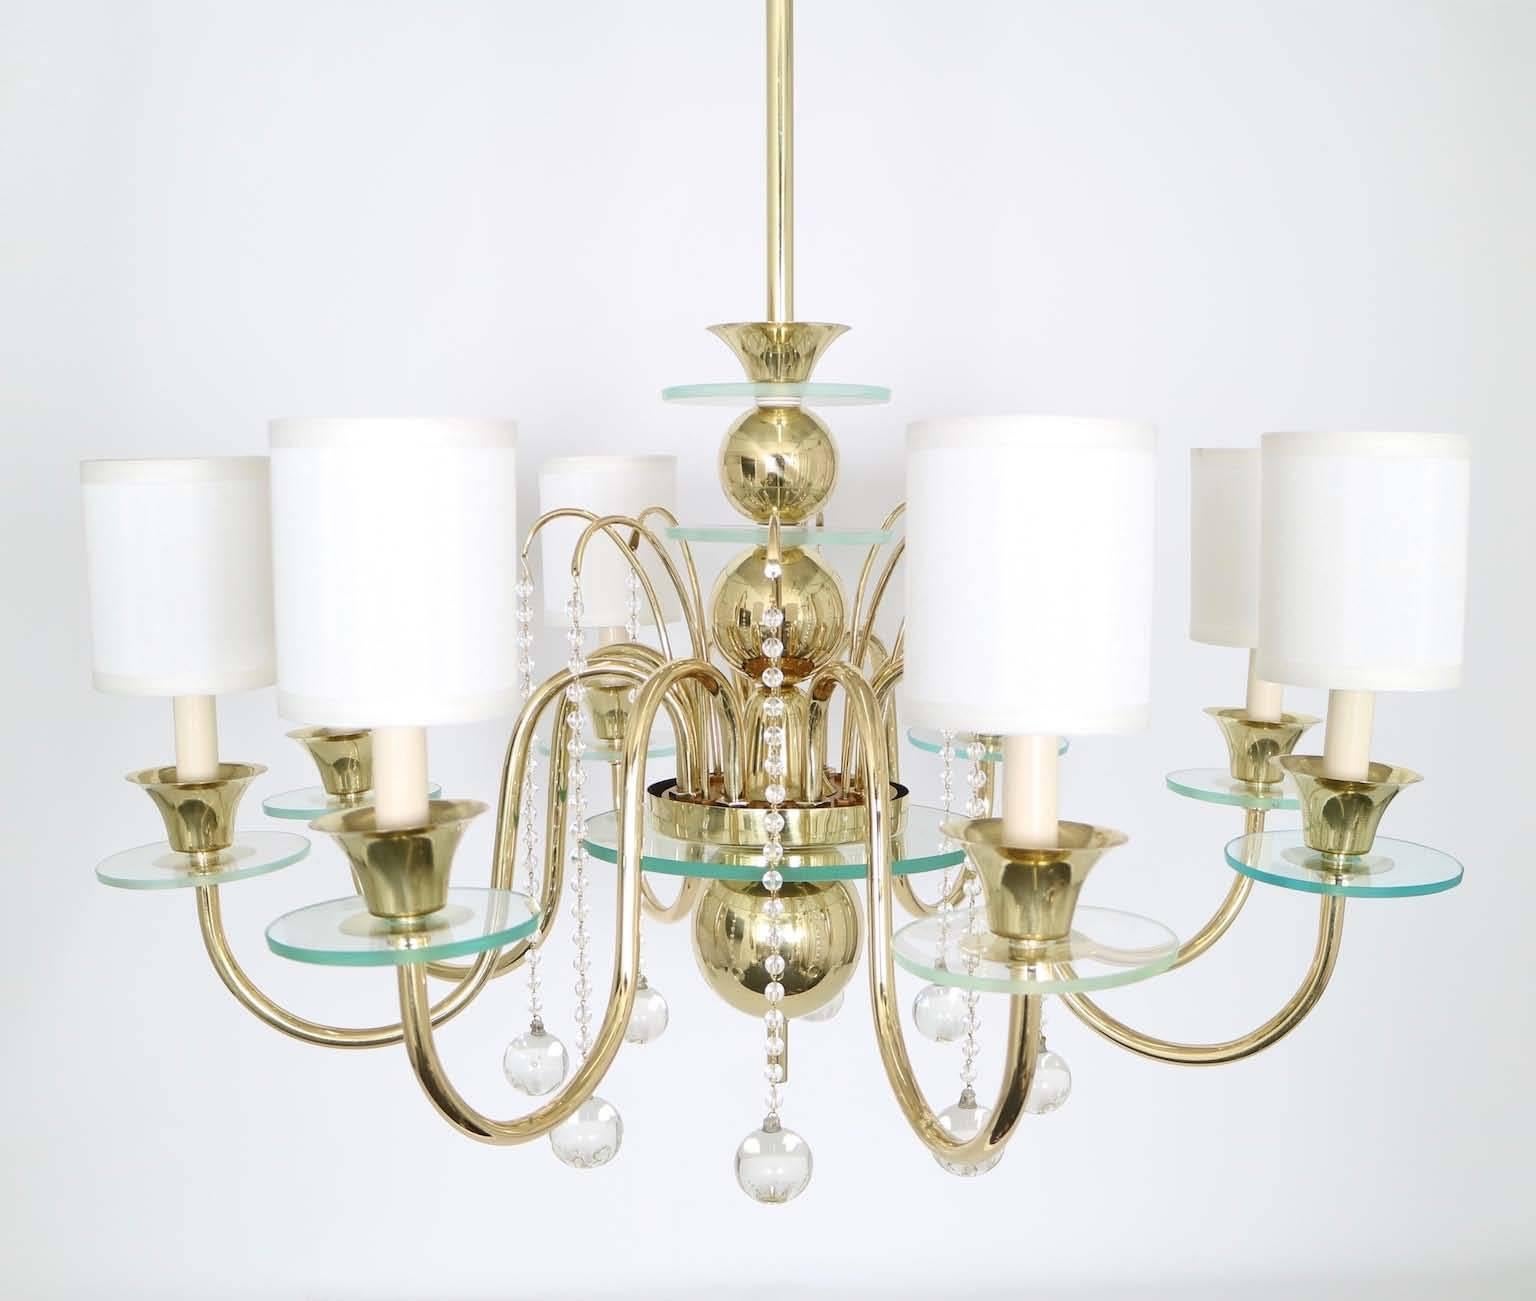 Mid-20th Century Restored Brass Chandelier in the Manner of Tommi Parzinger